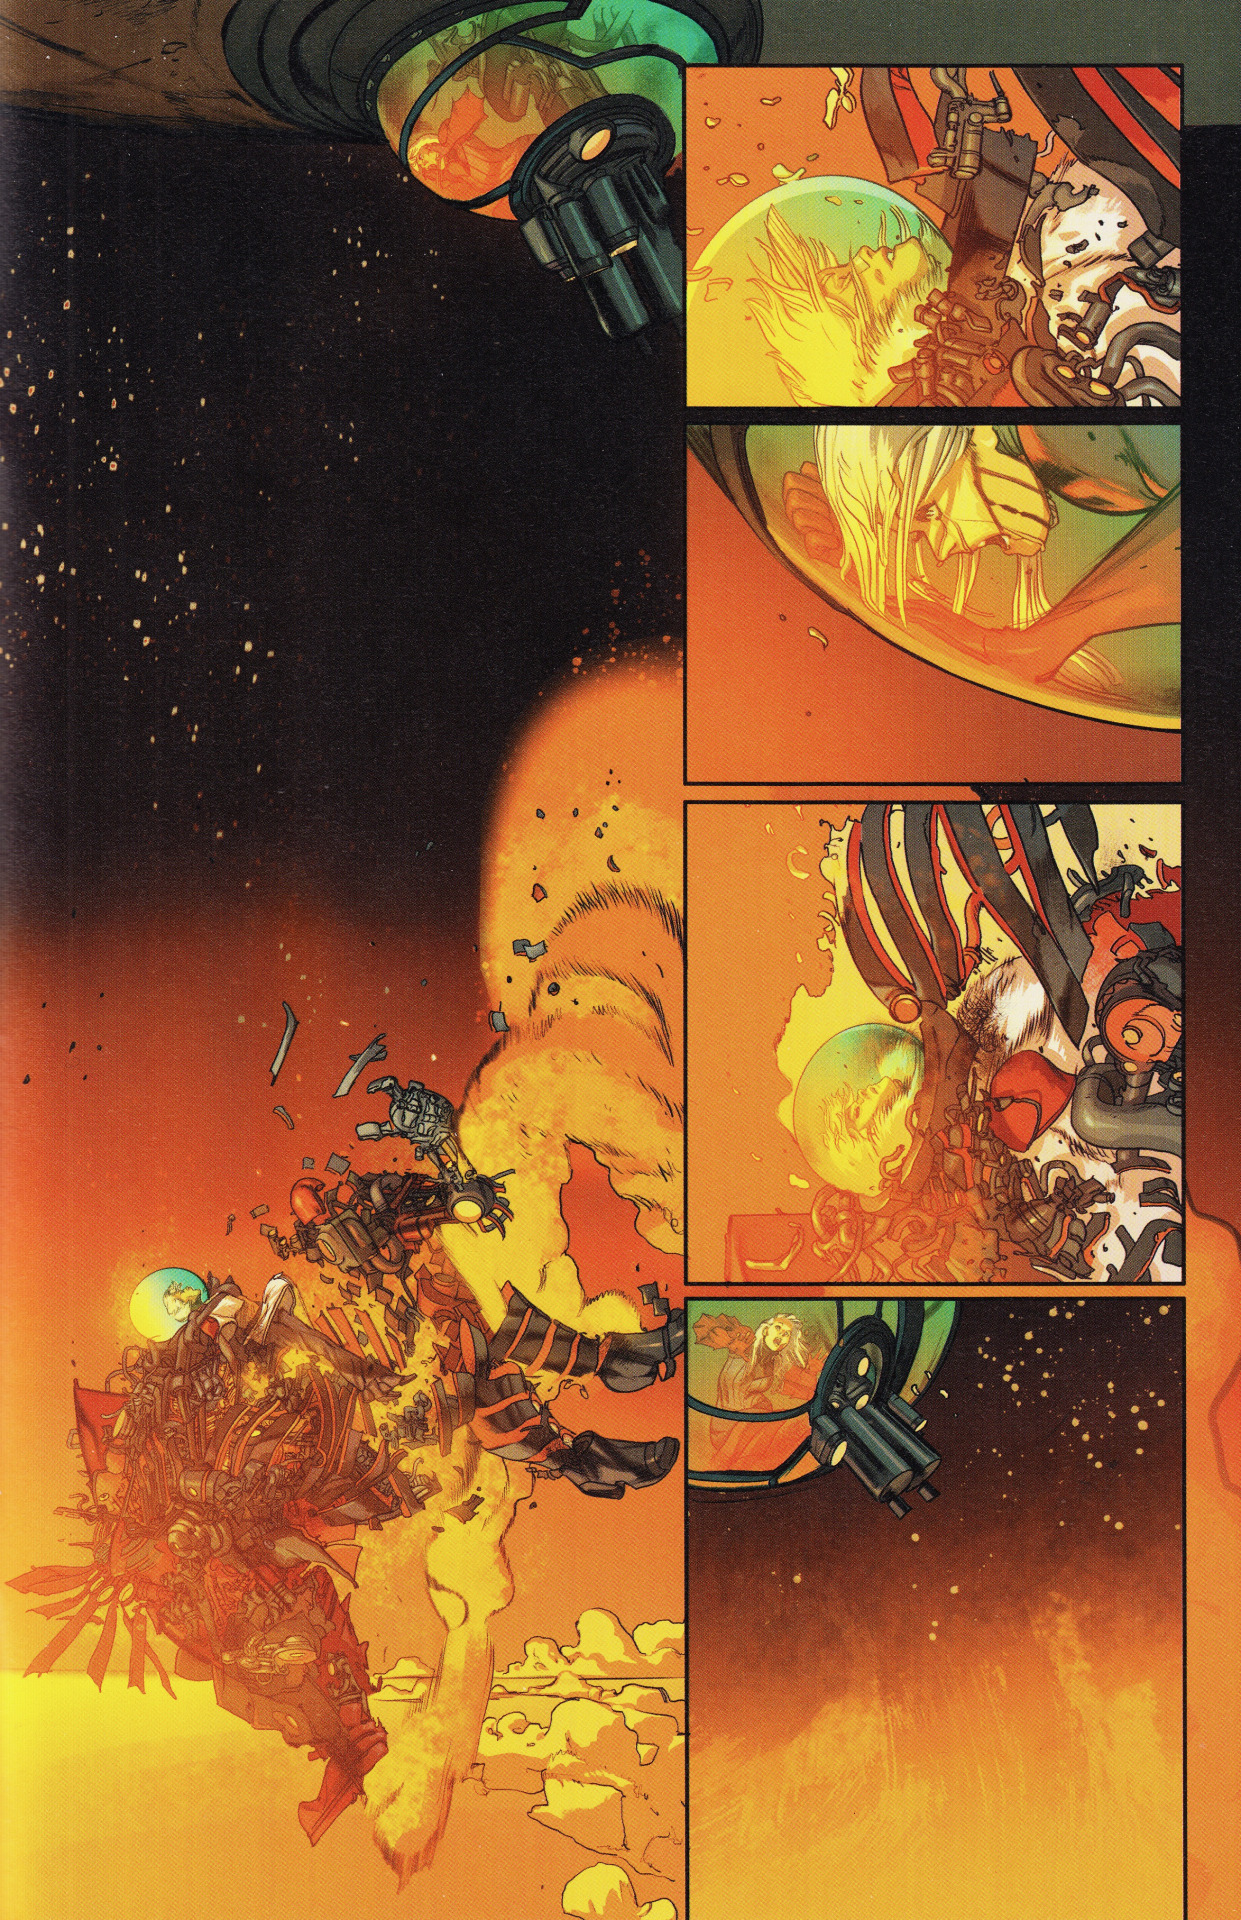 The Blackest of Suns — “Offline” Low #26 (February 2021) Rick Remender,...